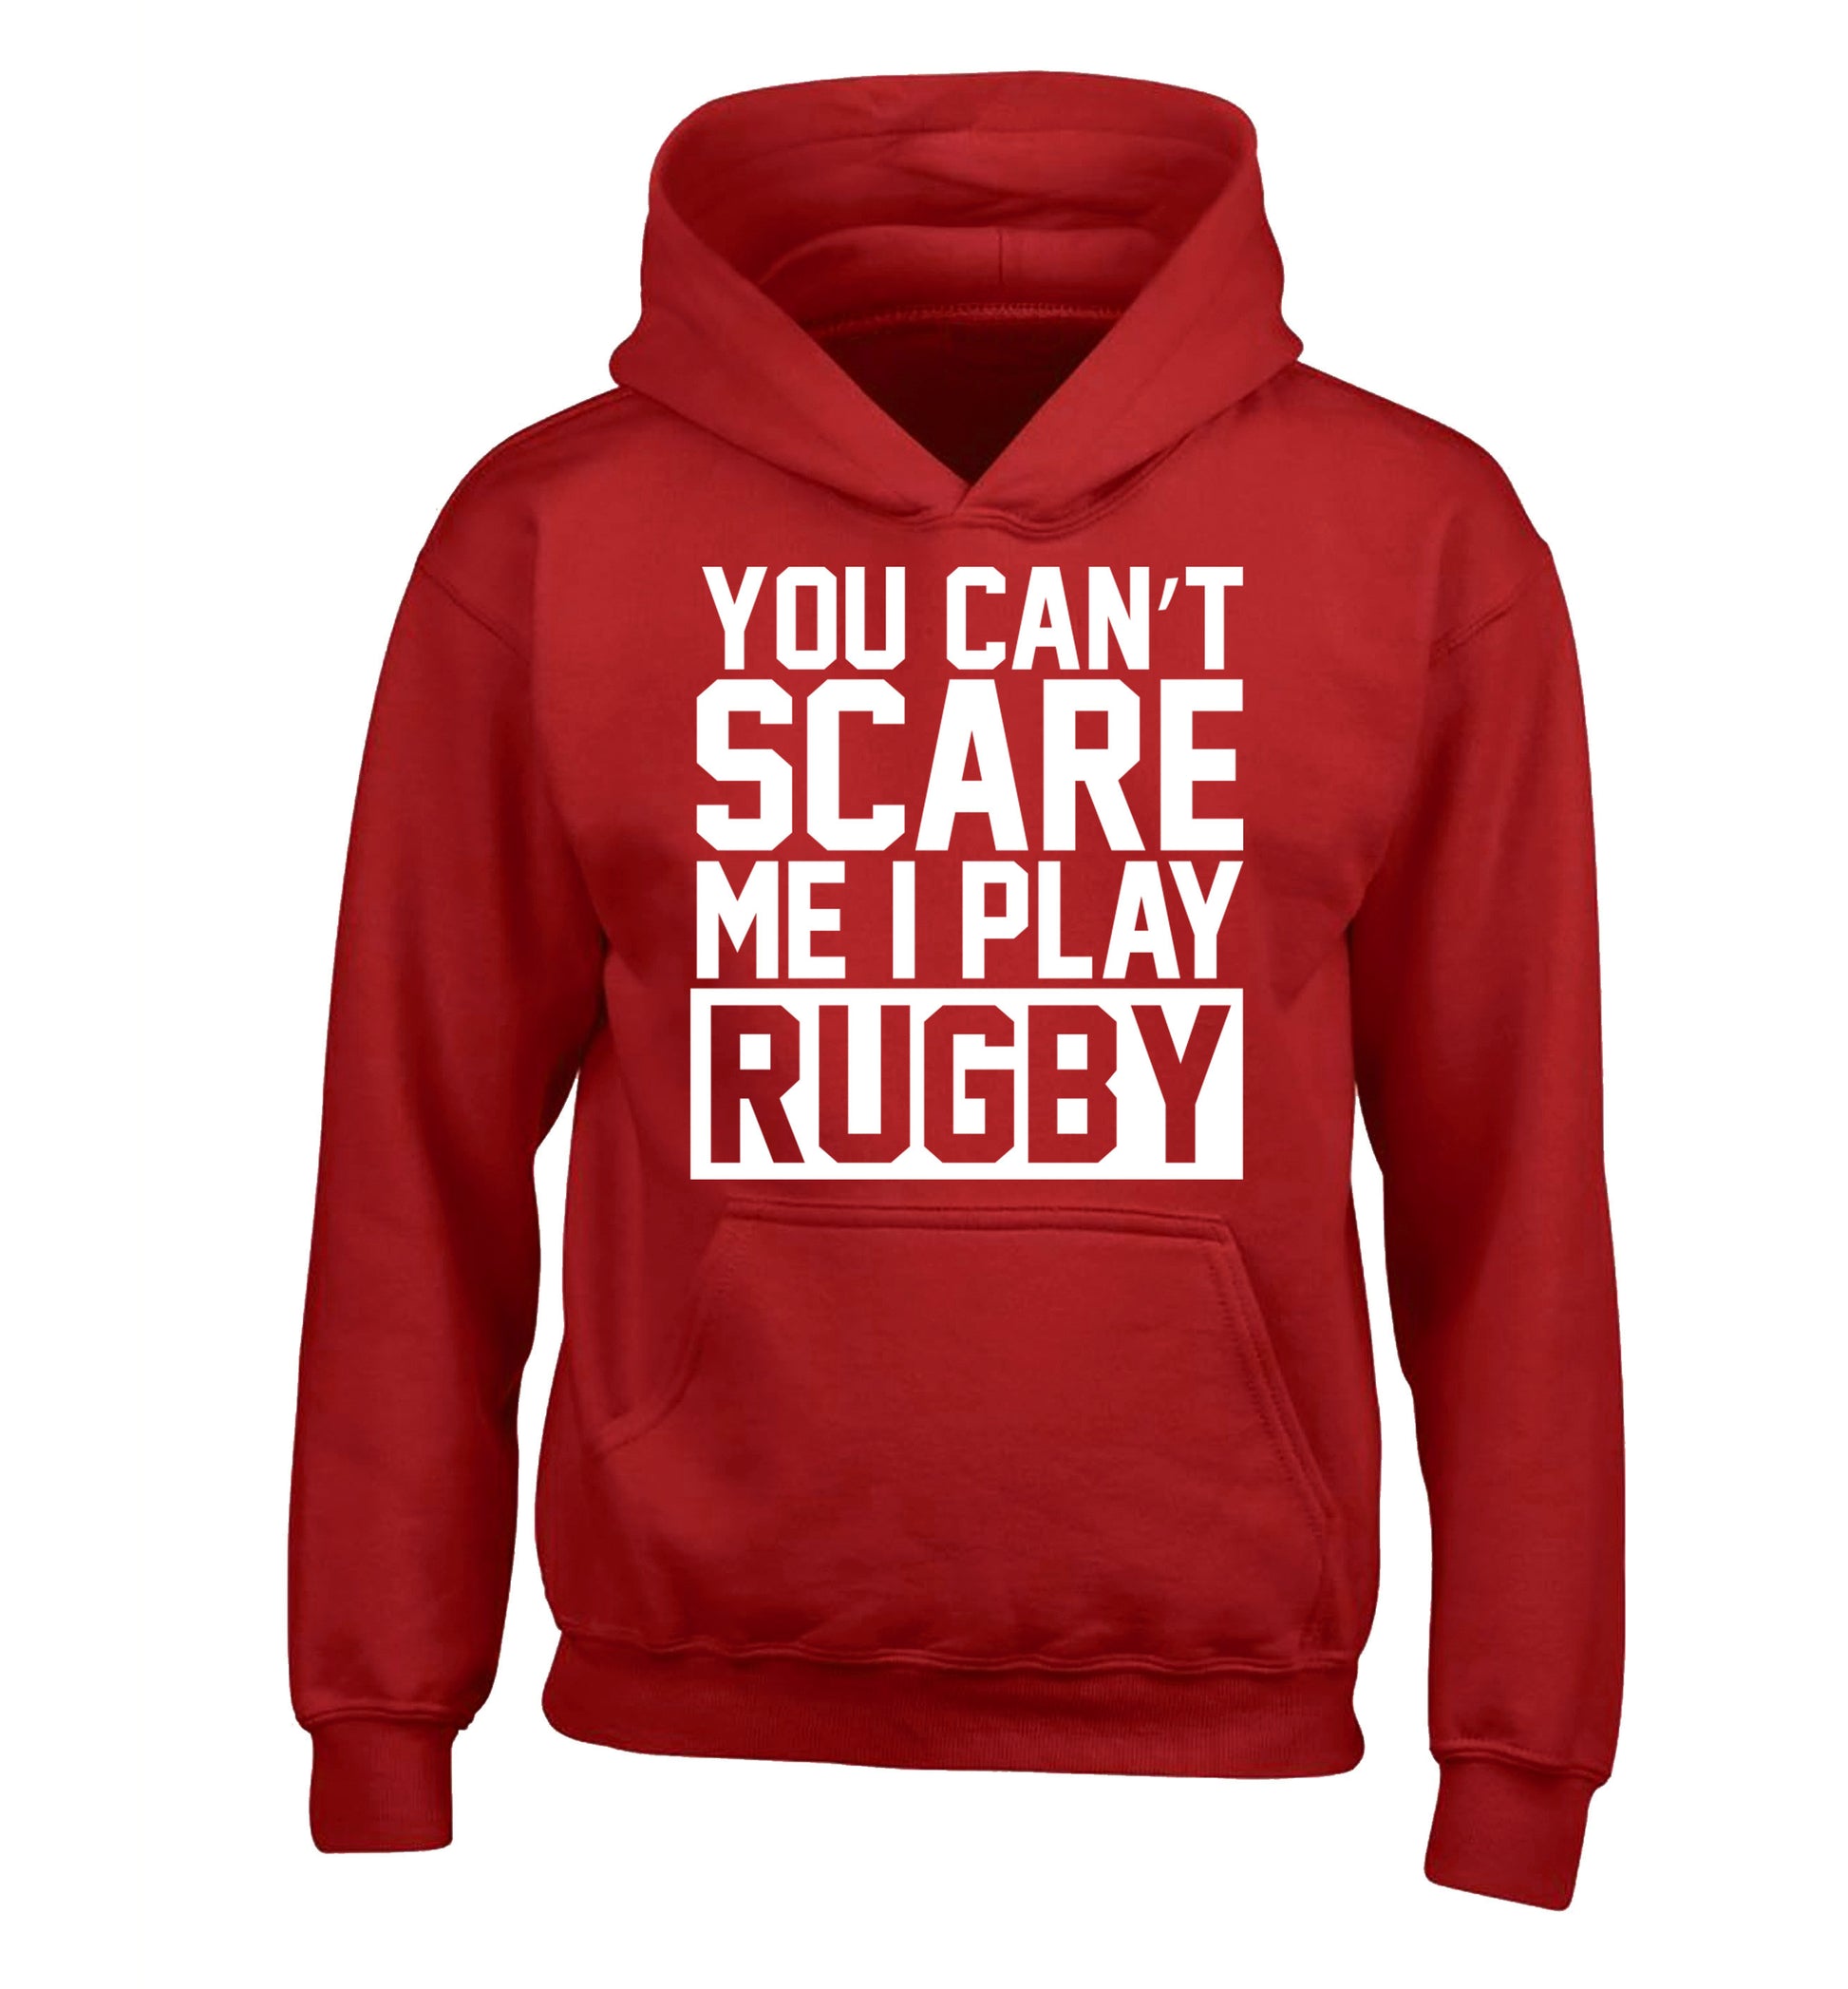 You can't scare me I play rugby children's red hoodie 12-14 Years